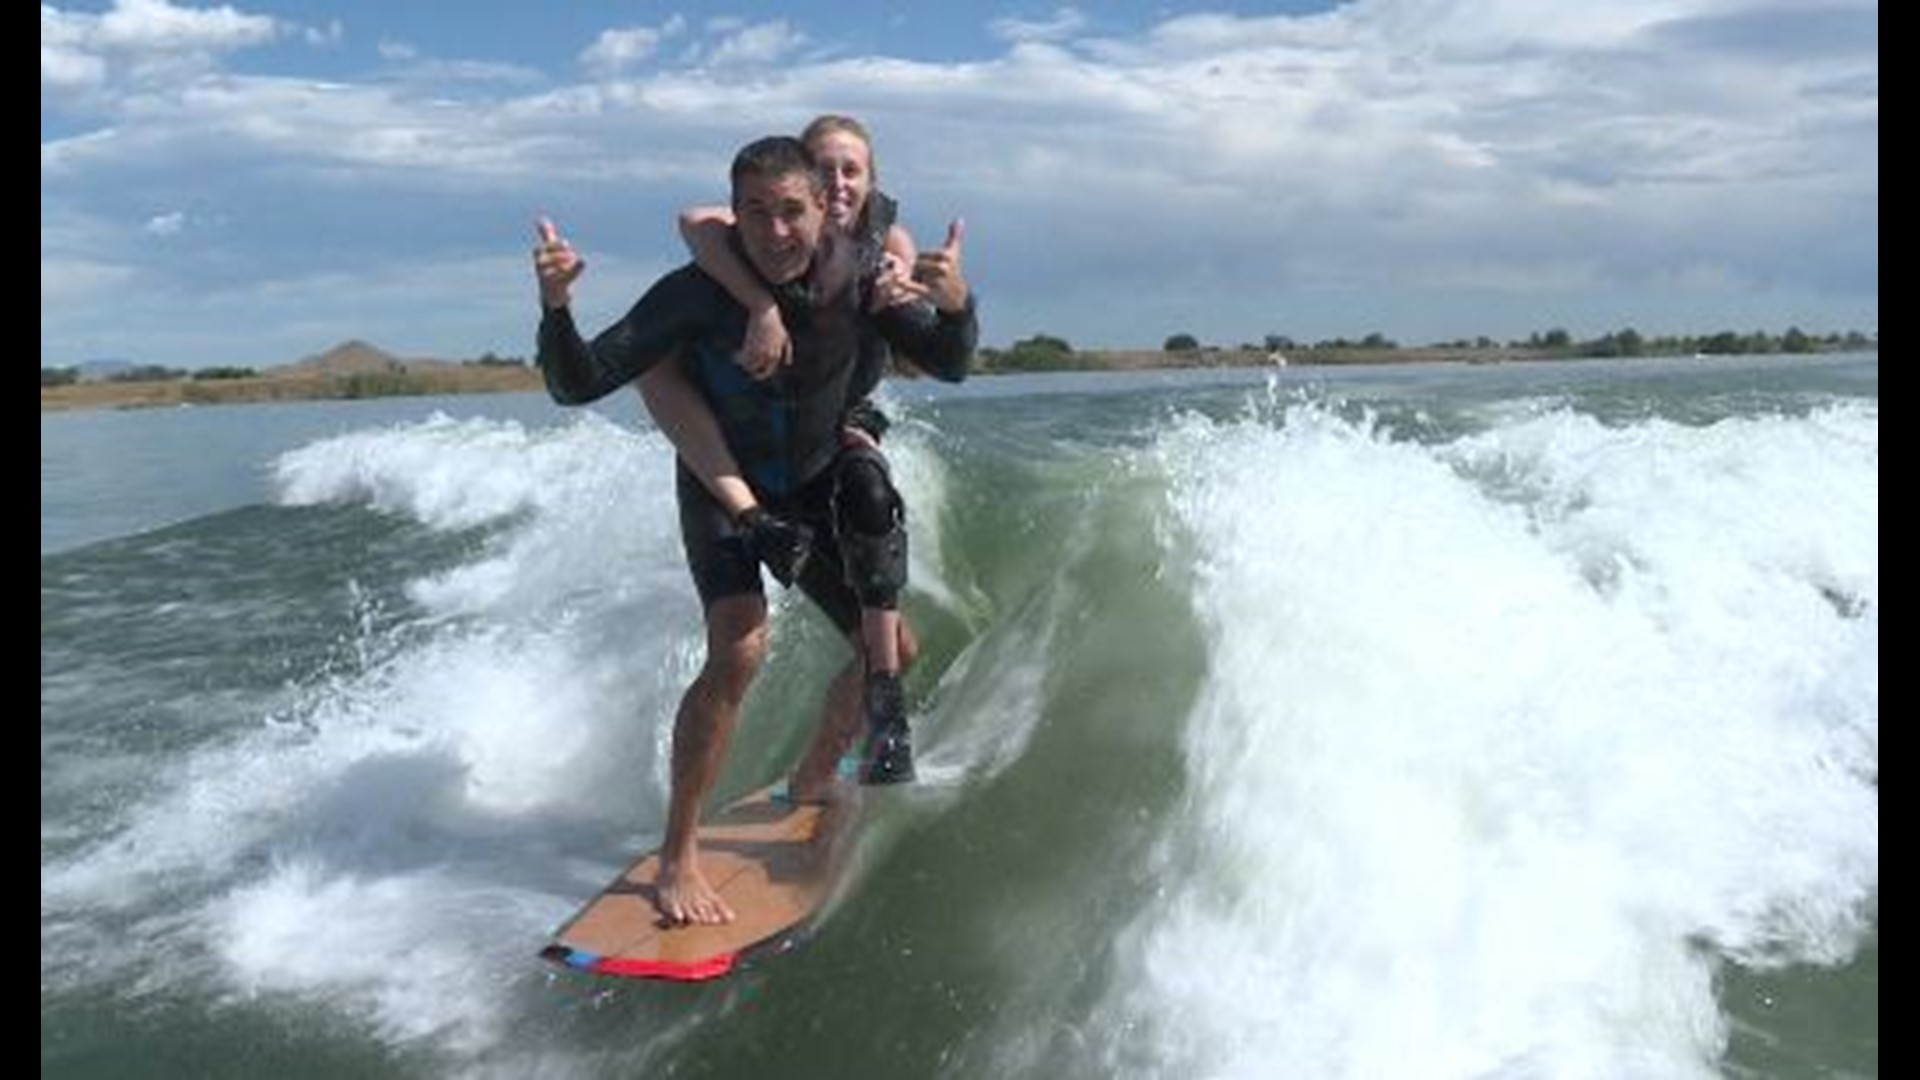 The "Brave the Wave" adaptive wake surfing tour surfed through Boulder Reservoir this weekend, hosted by Tommy's Boats and the Hanger Clinic.